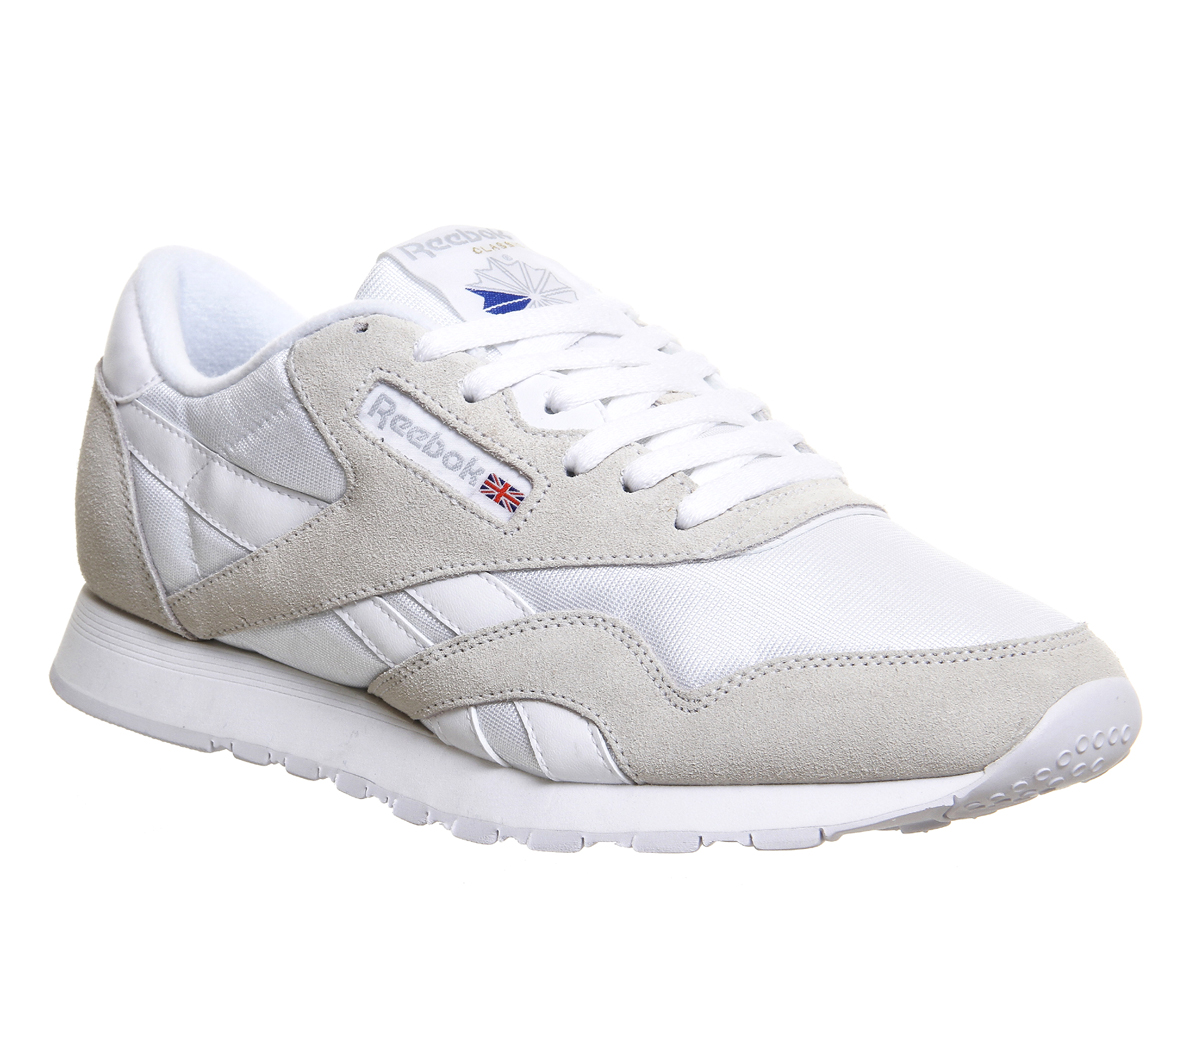 reebok classic nylon trainers in black and white